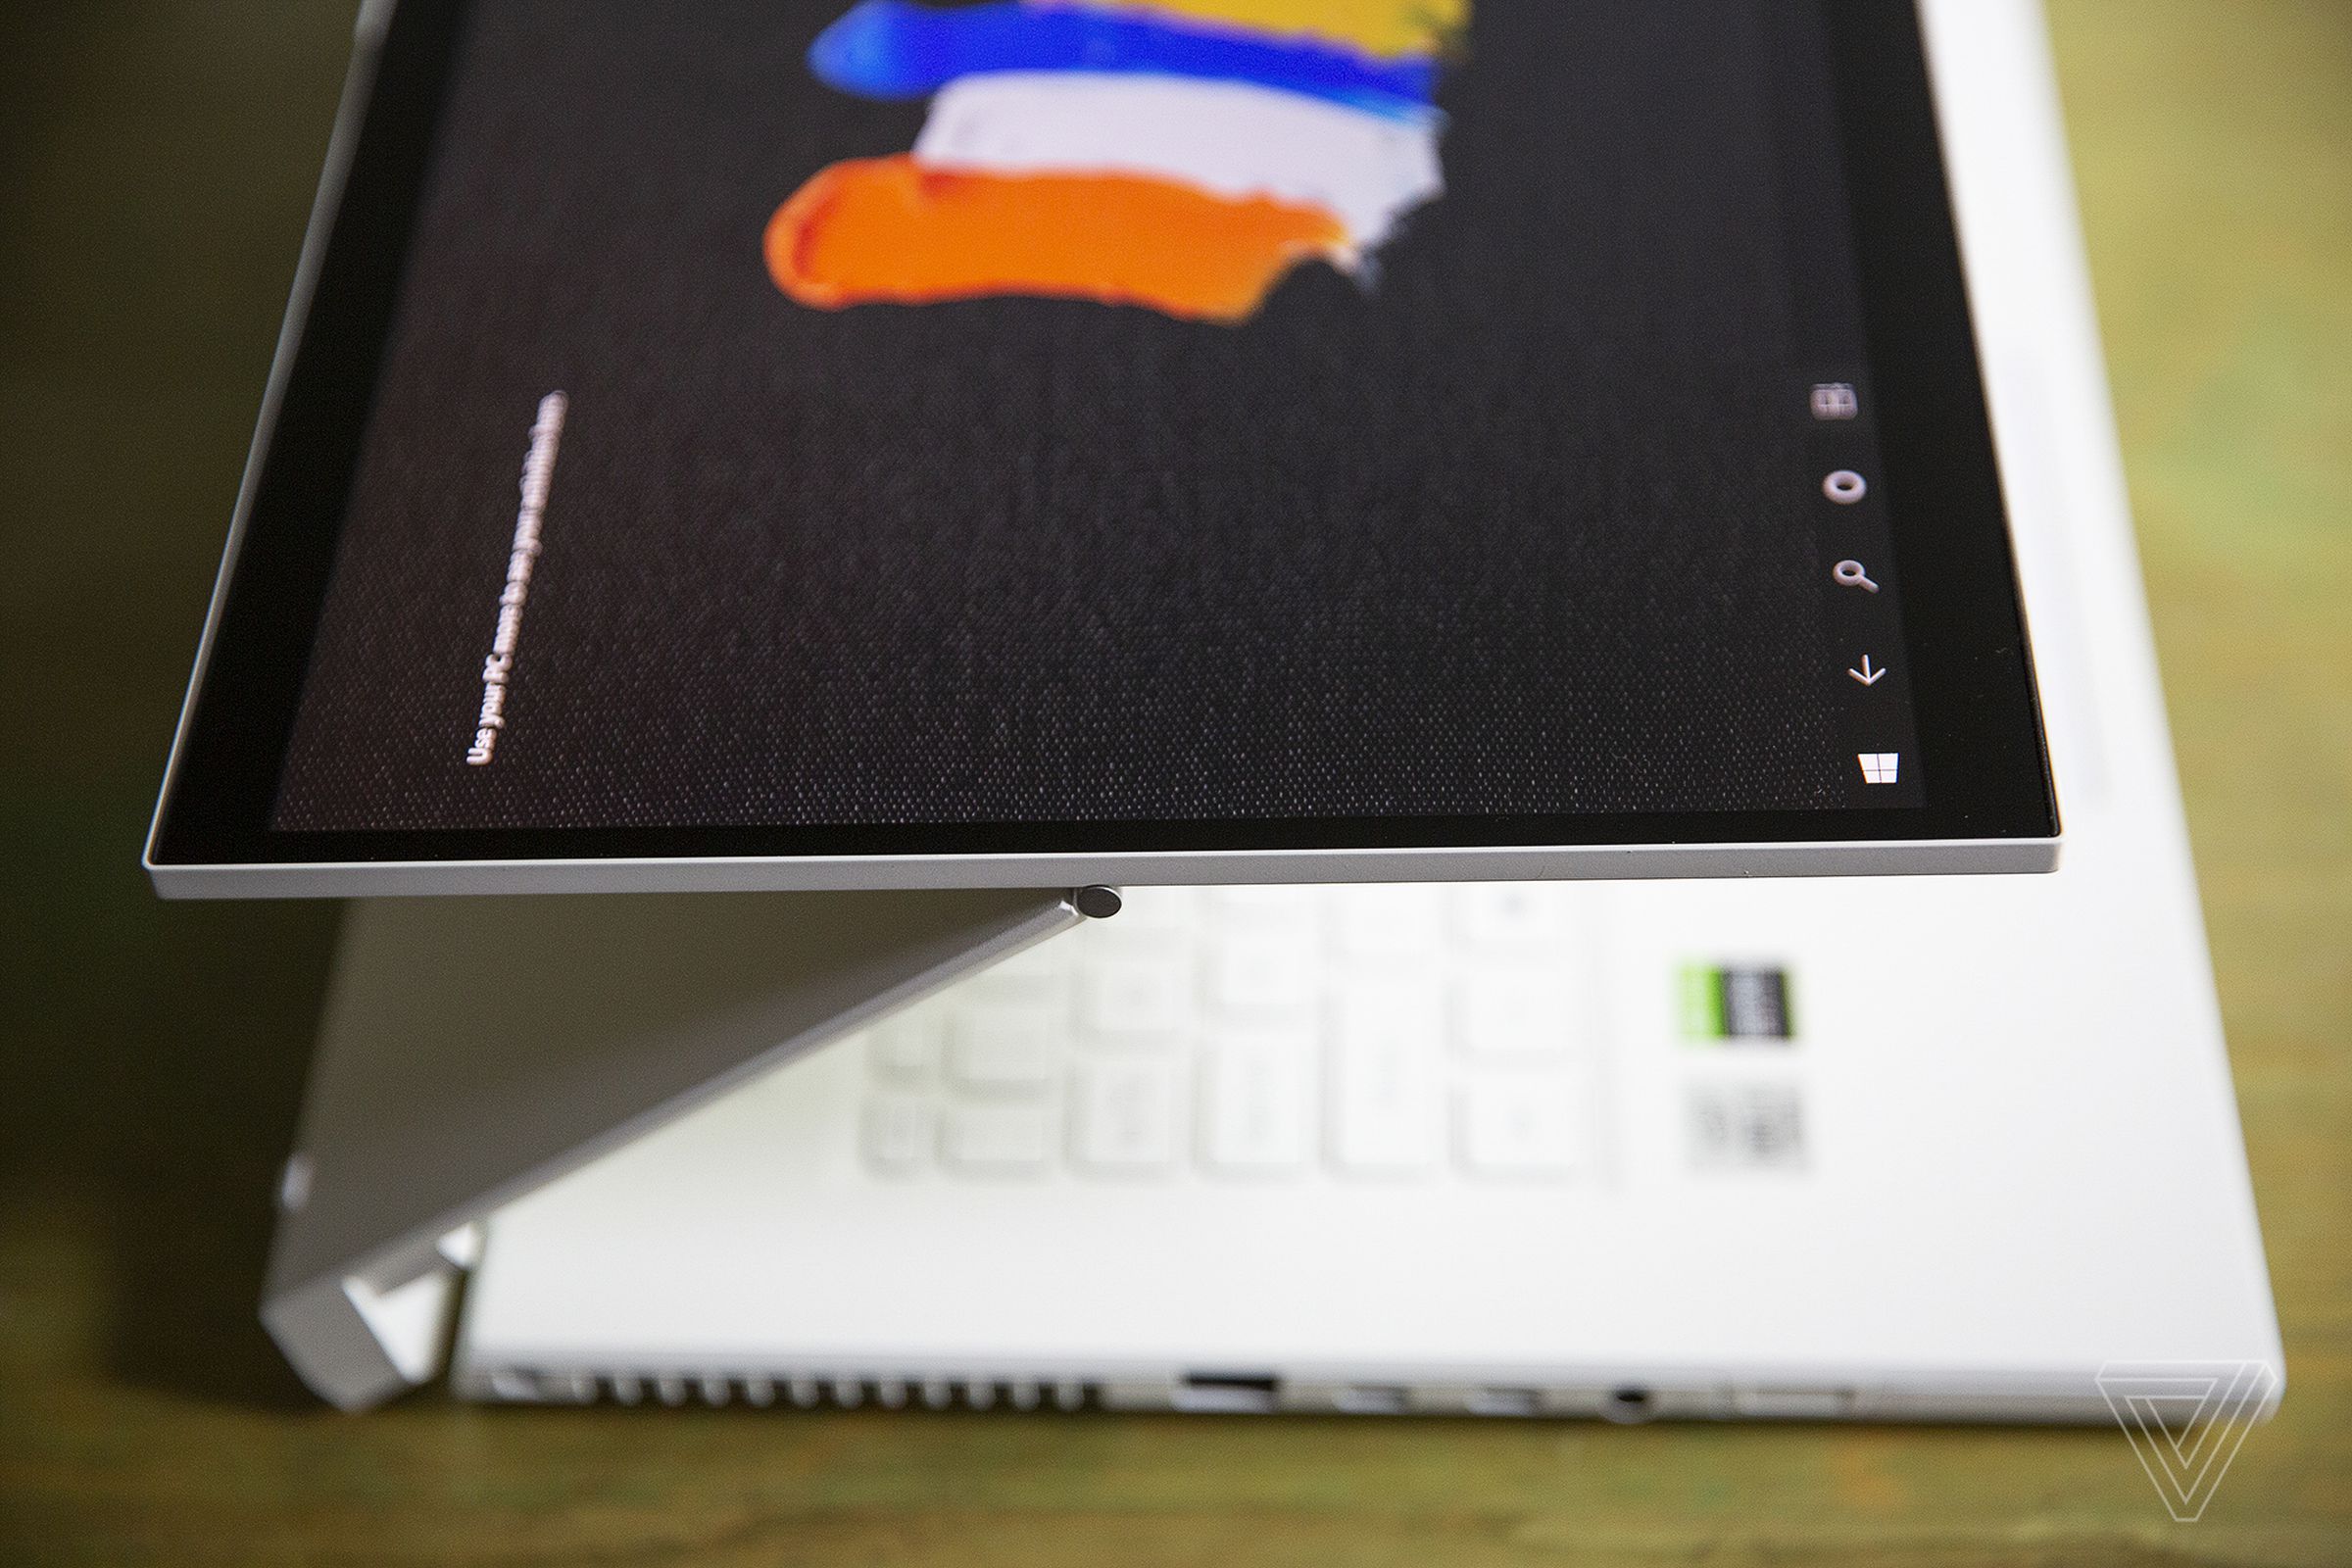 The Acer ConceptD 7 Ezel in Float, seen from above and to the left. The screen displays several paintbrush strokes on a black background.